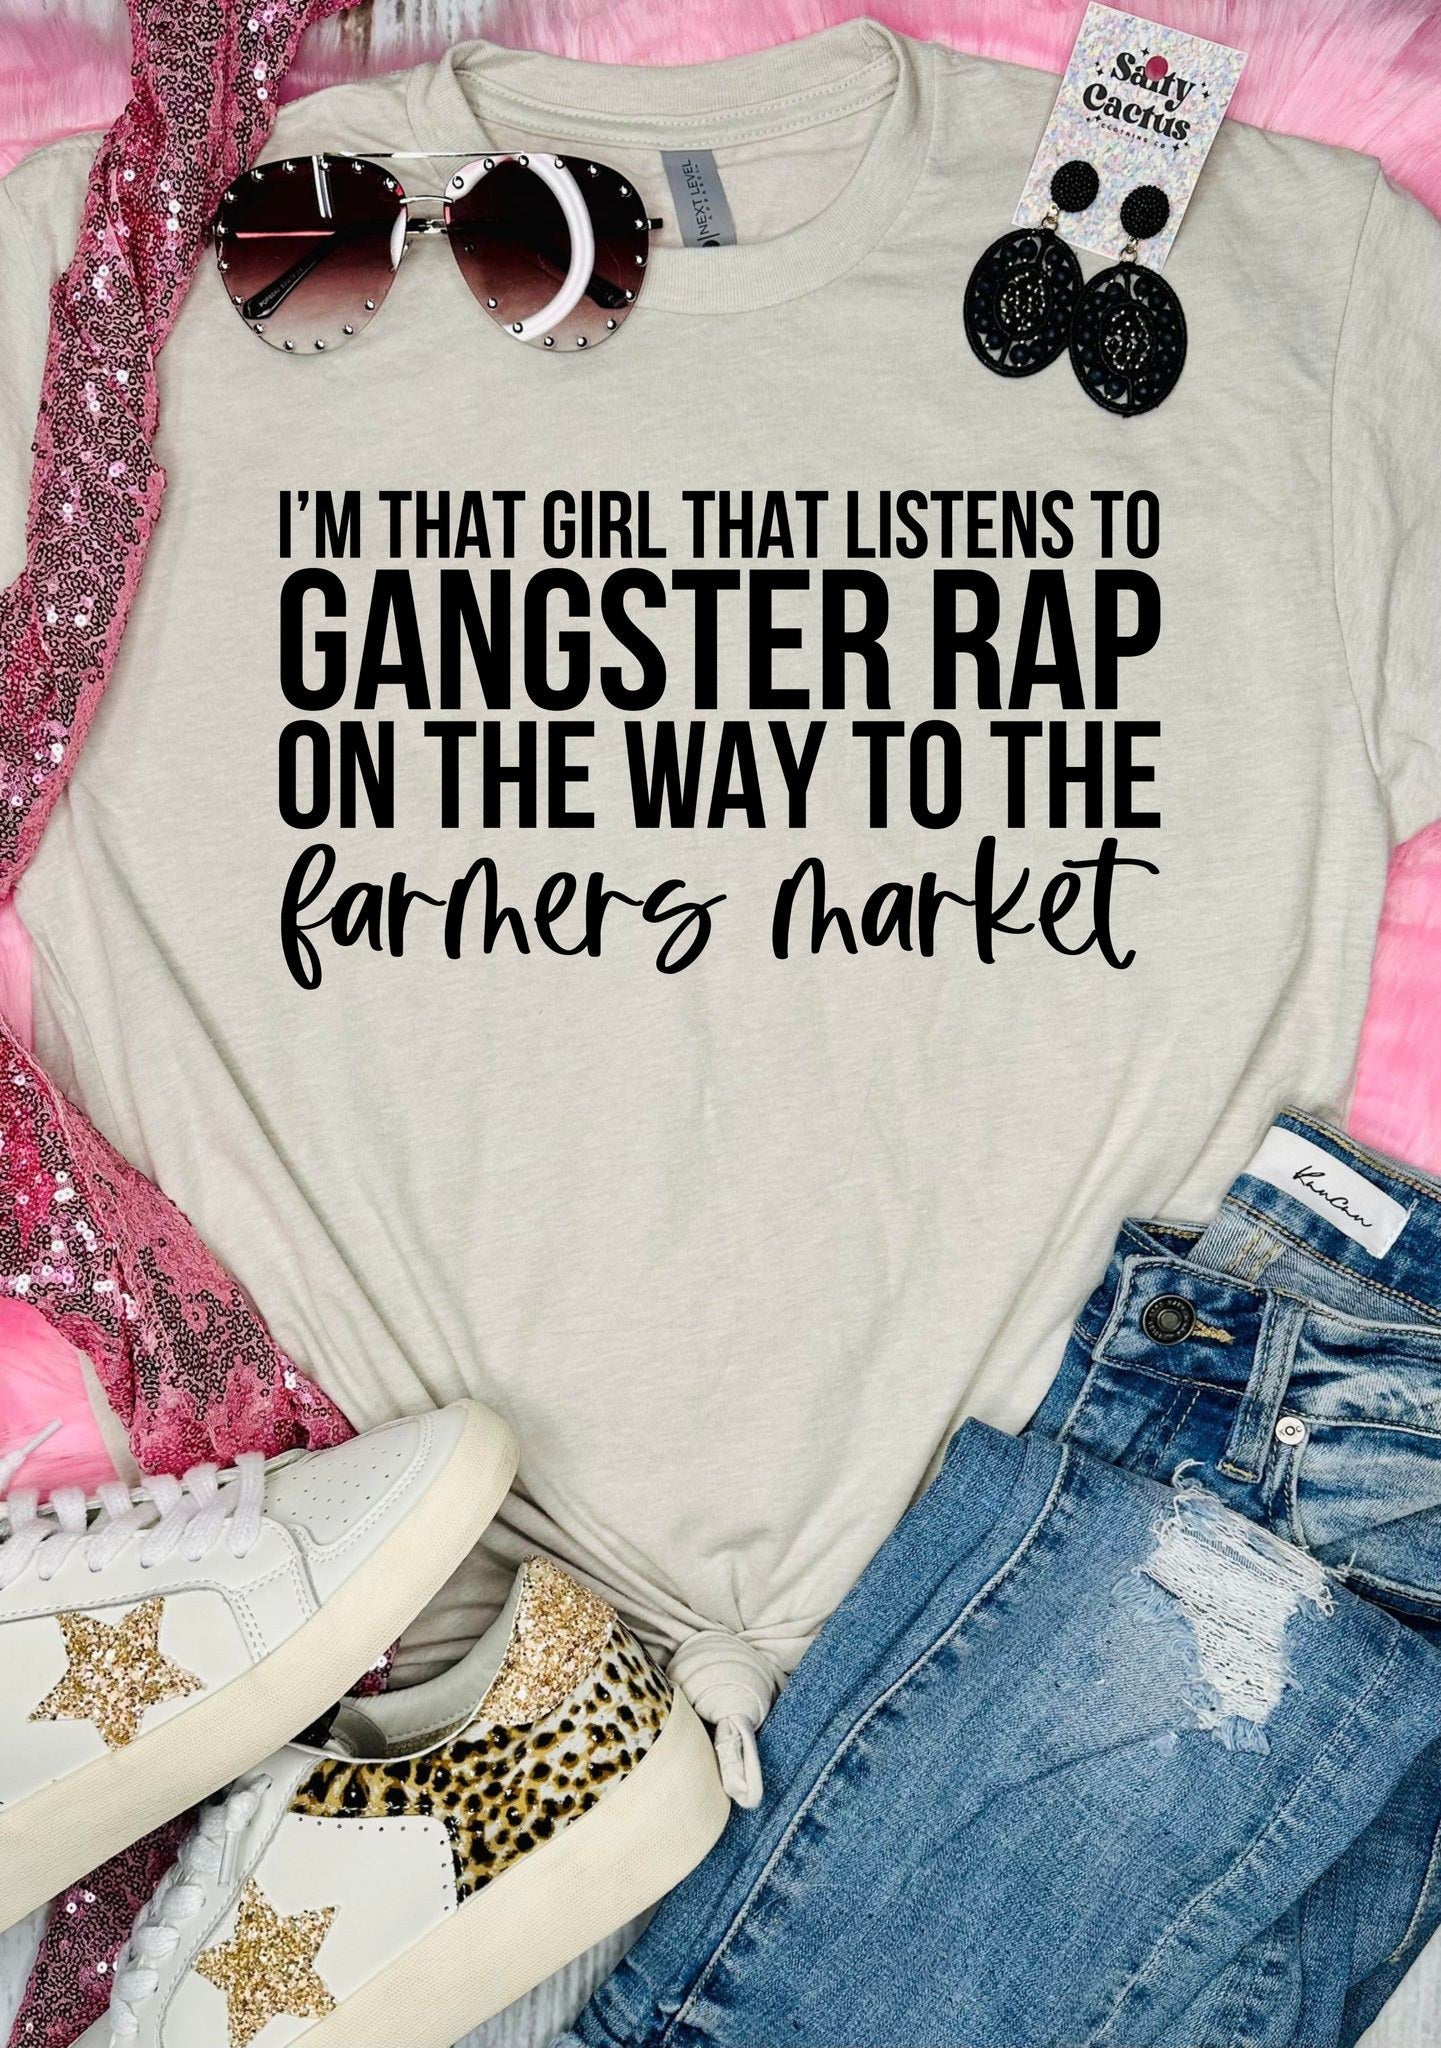 I'm That Girl that Listens to Gangster Rap Tan Tee